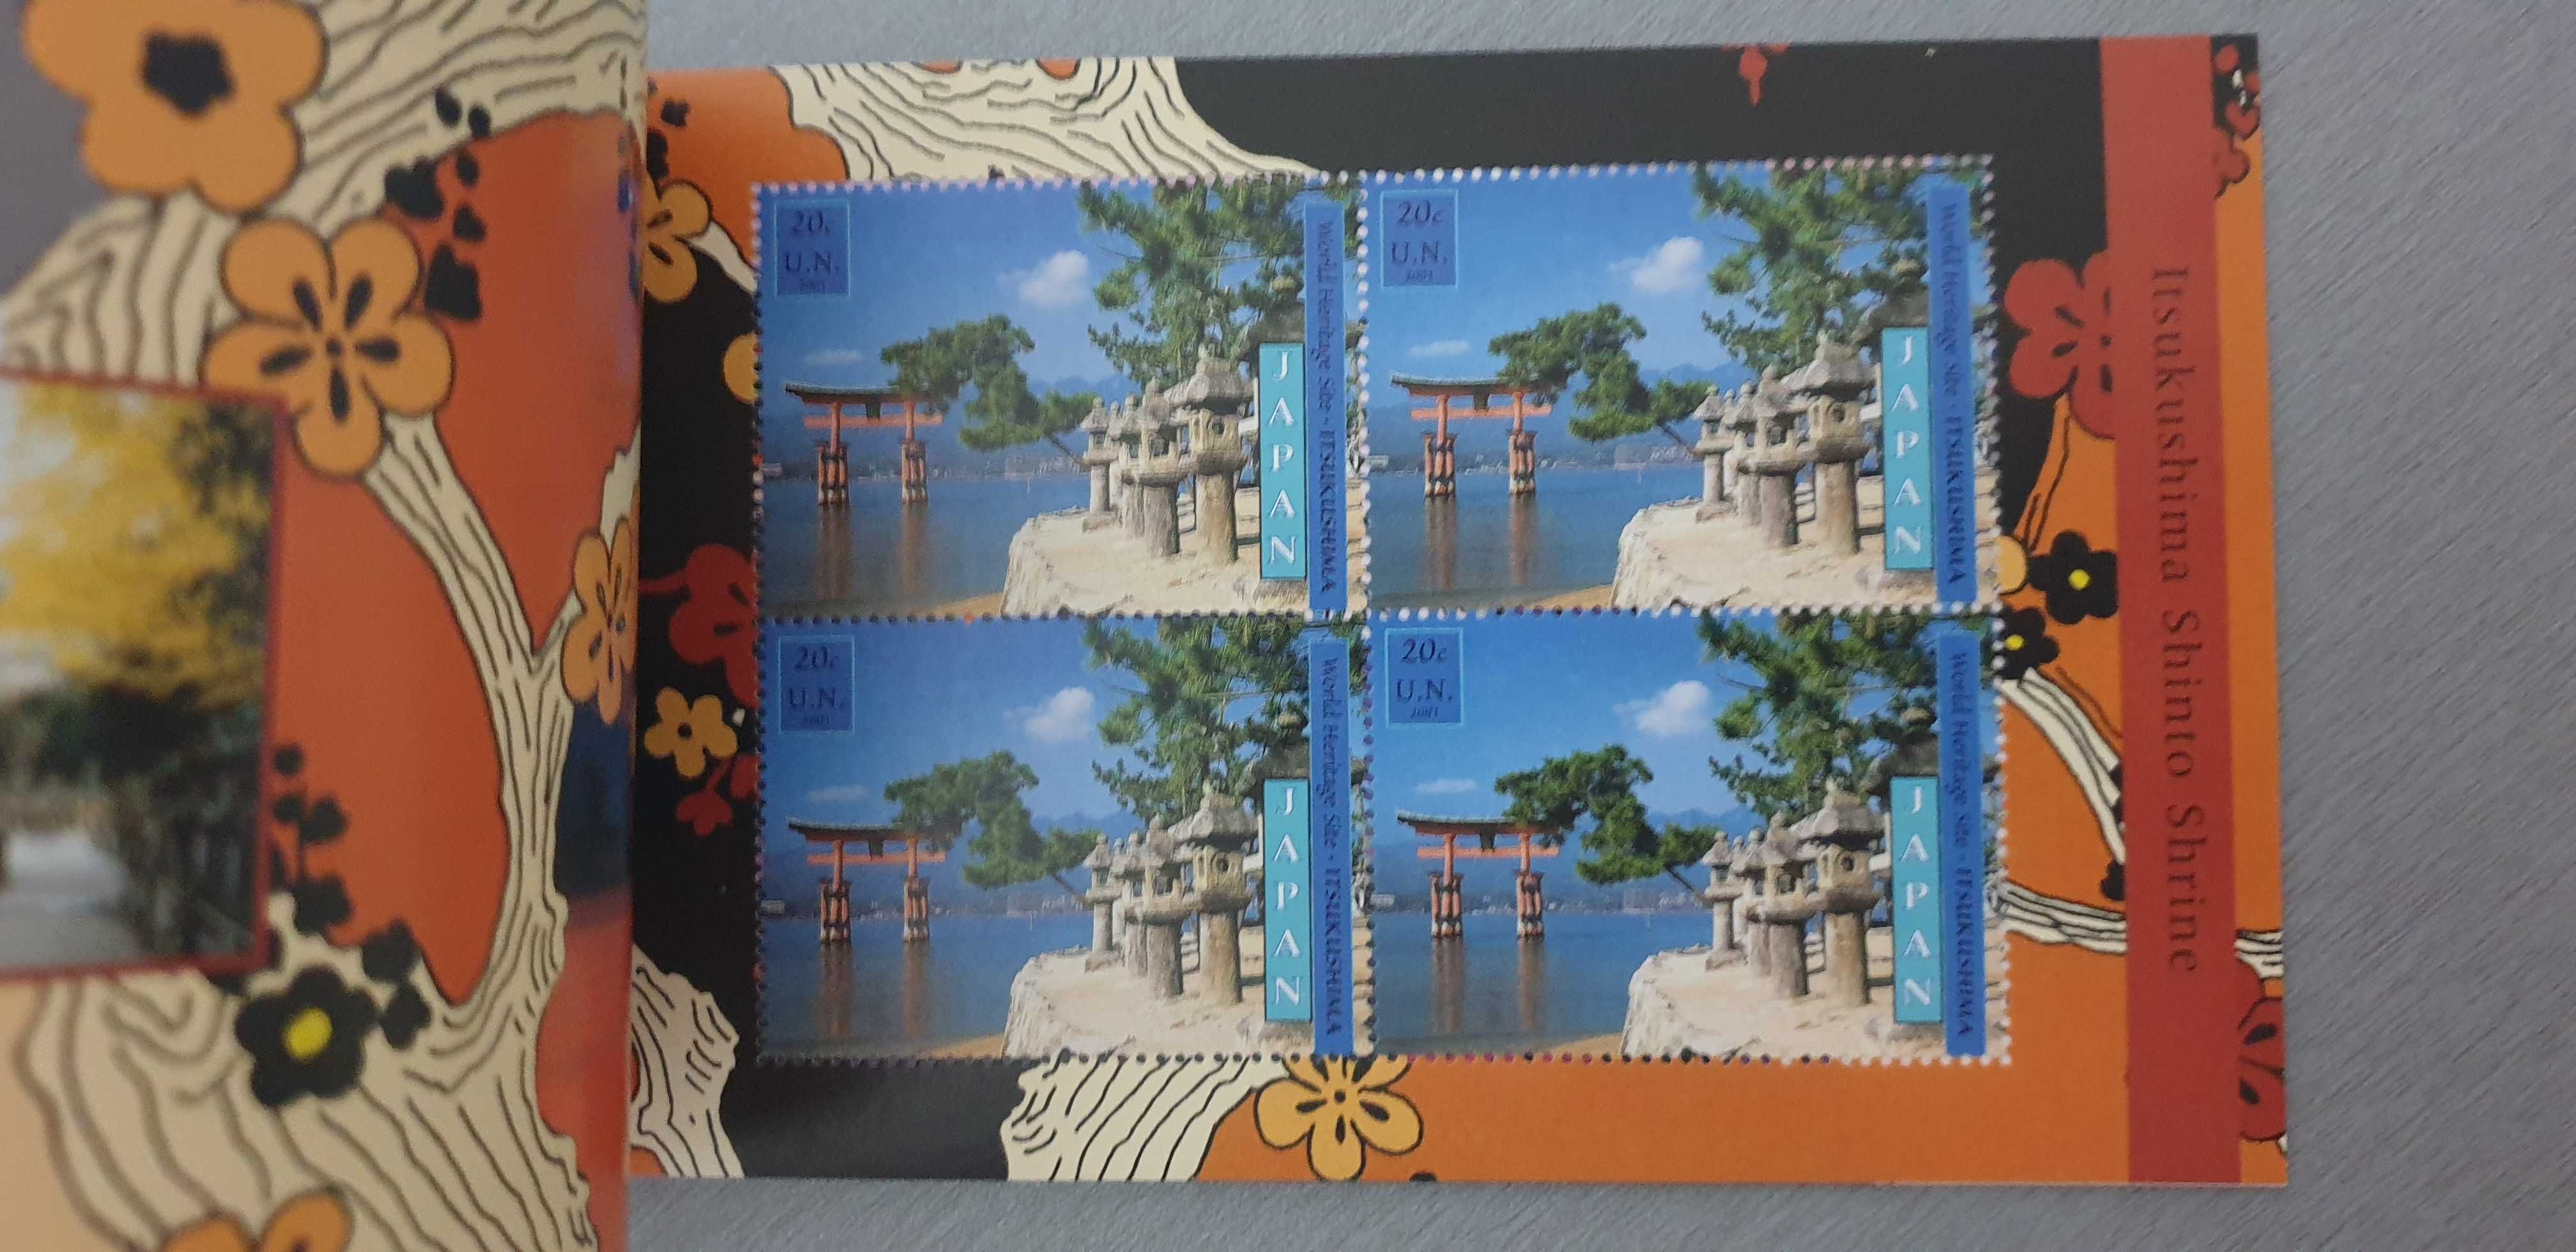 24 timbre din colectie Japan World Heritage (2001)